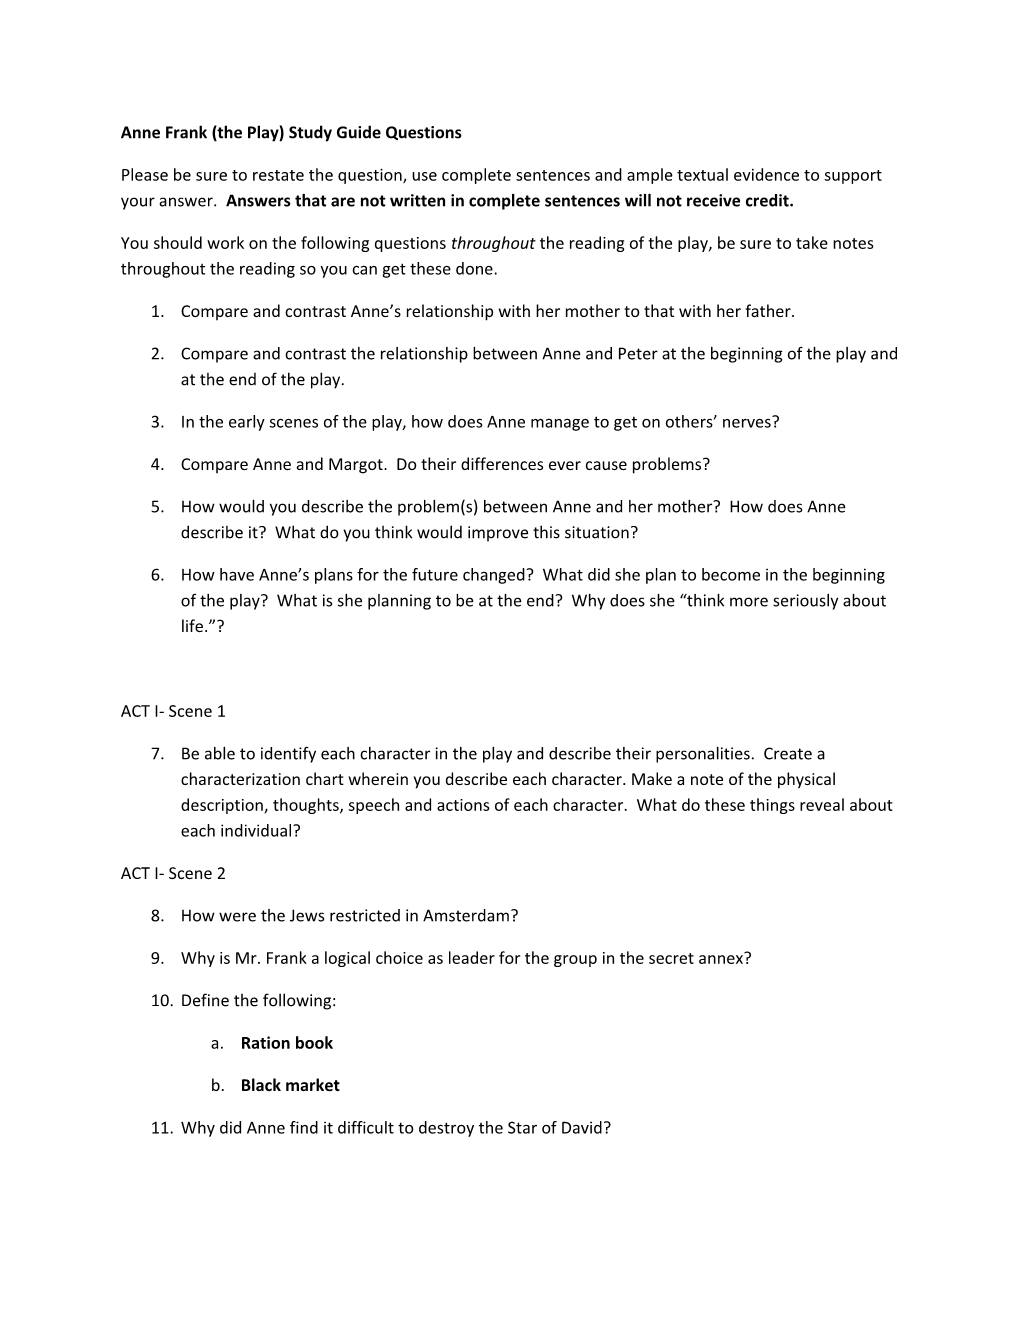 Anne Frank (The Play) Study Guide Questions